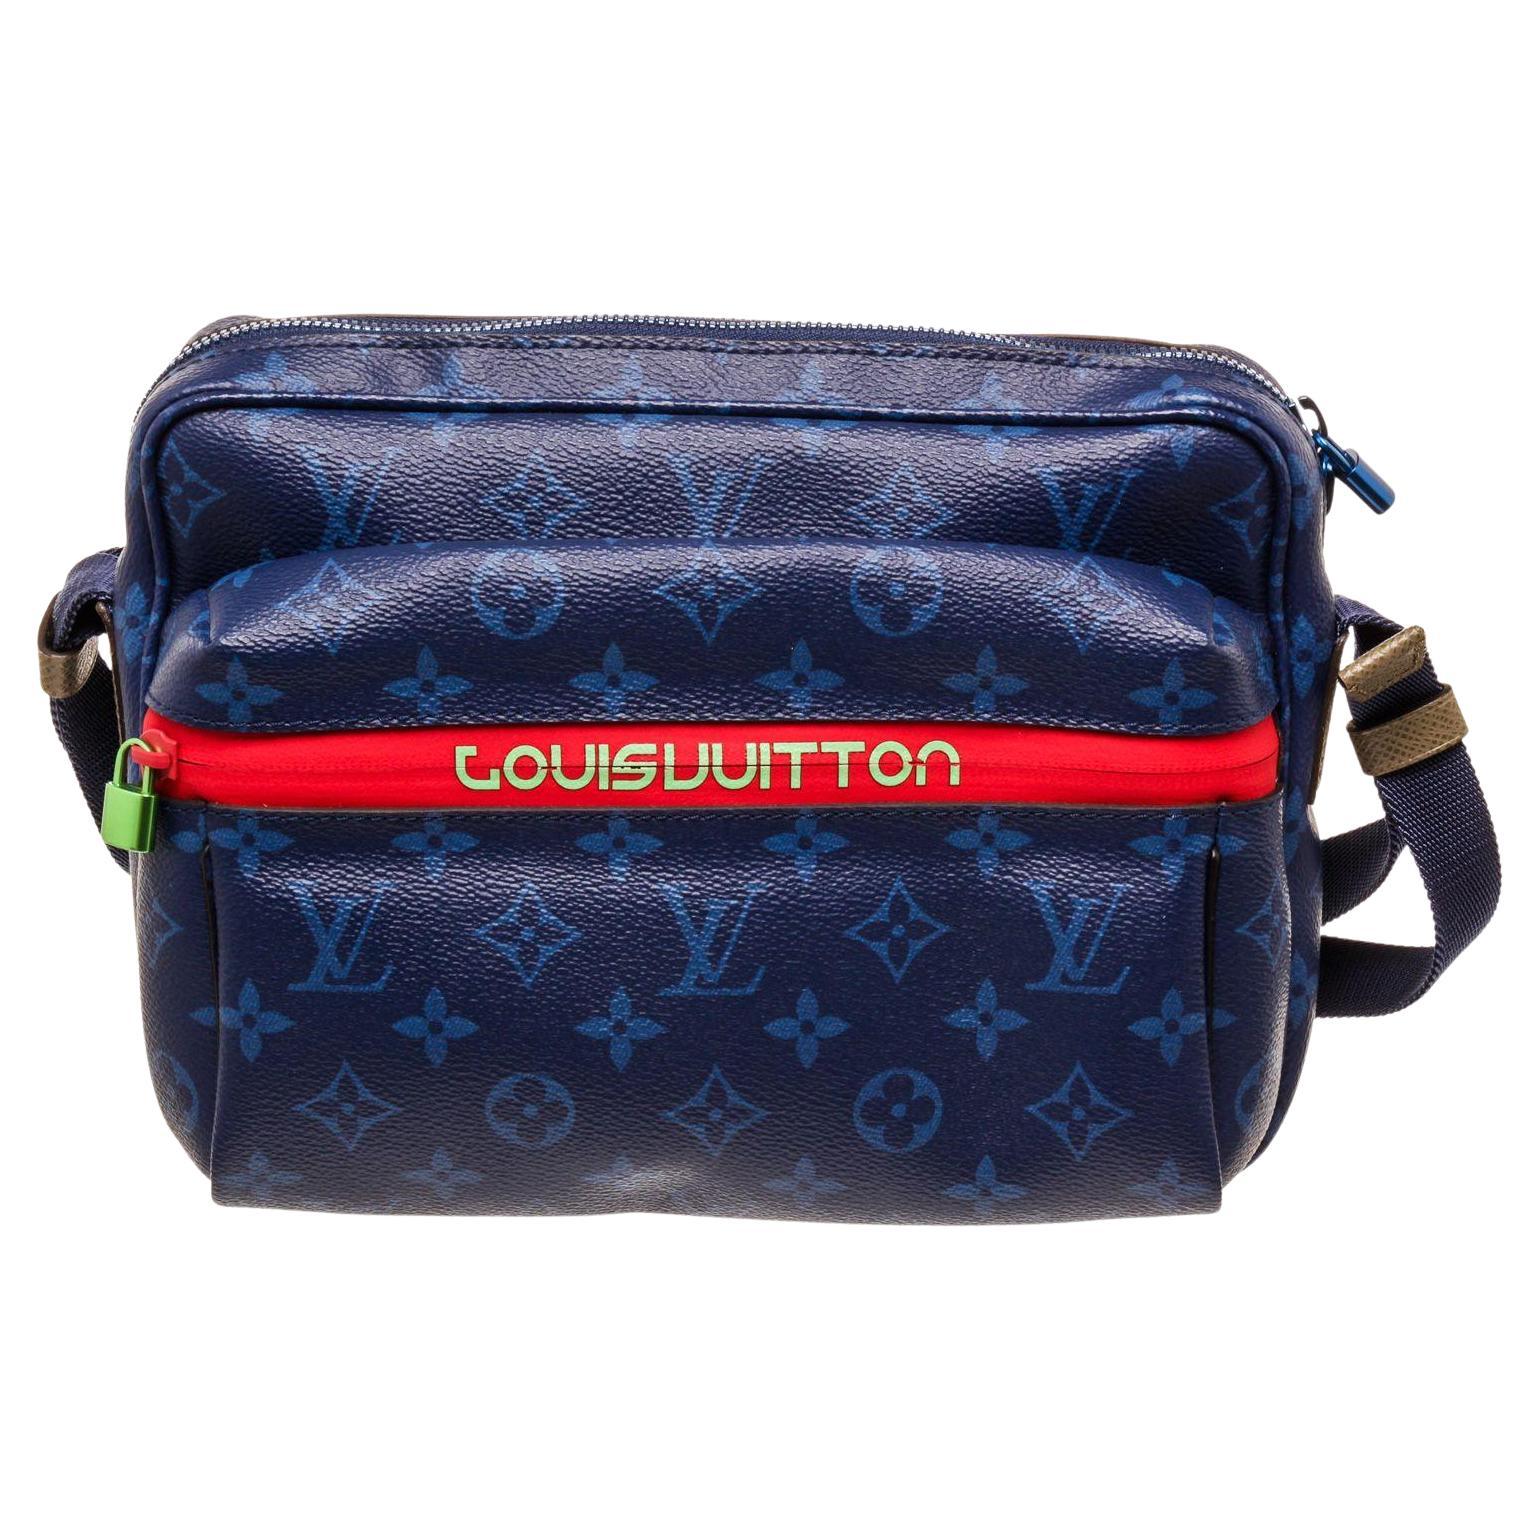 Louis Vuitton Outdoor Messenger Bag PM with blue hardware, adjustable strap For Sale